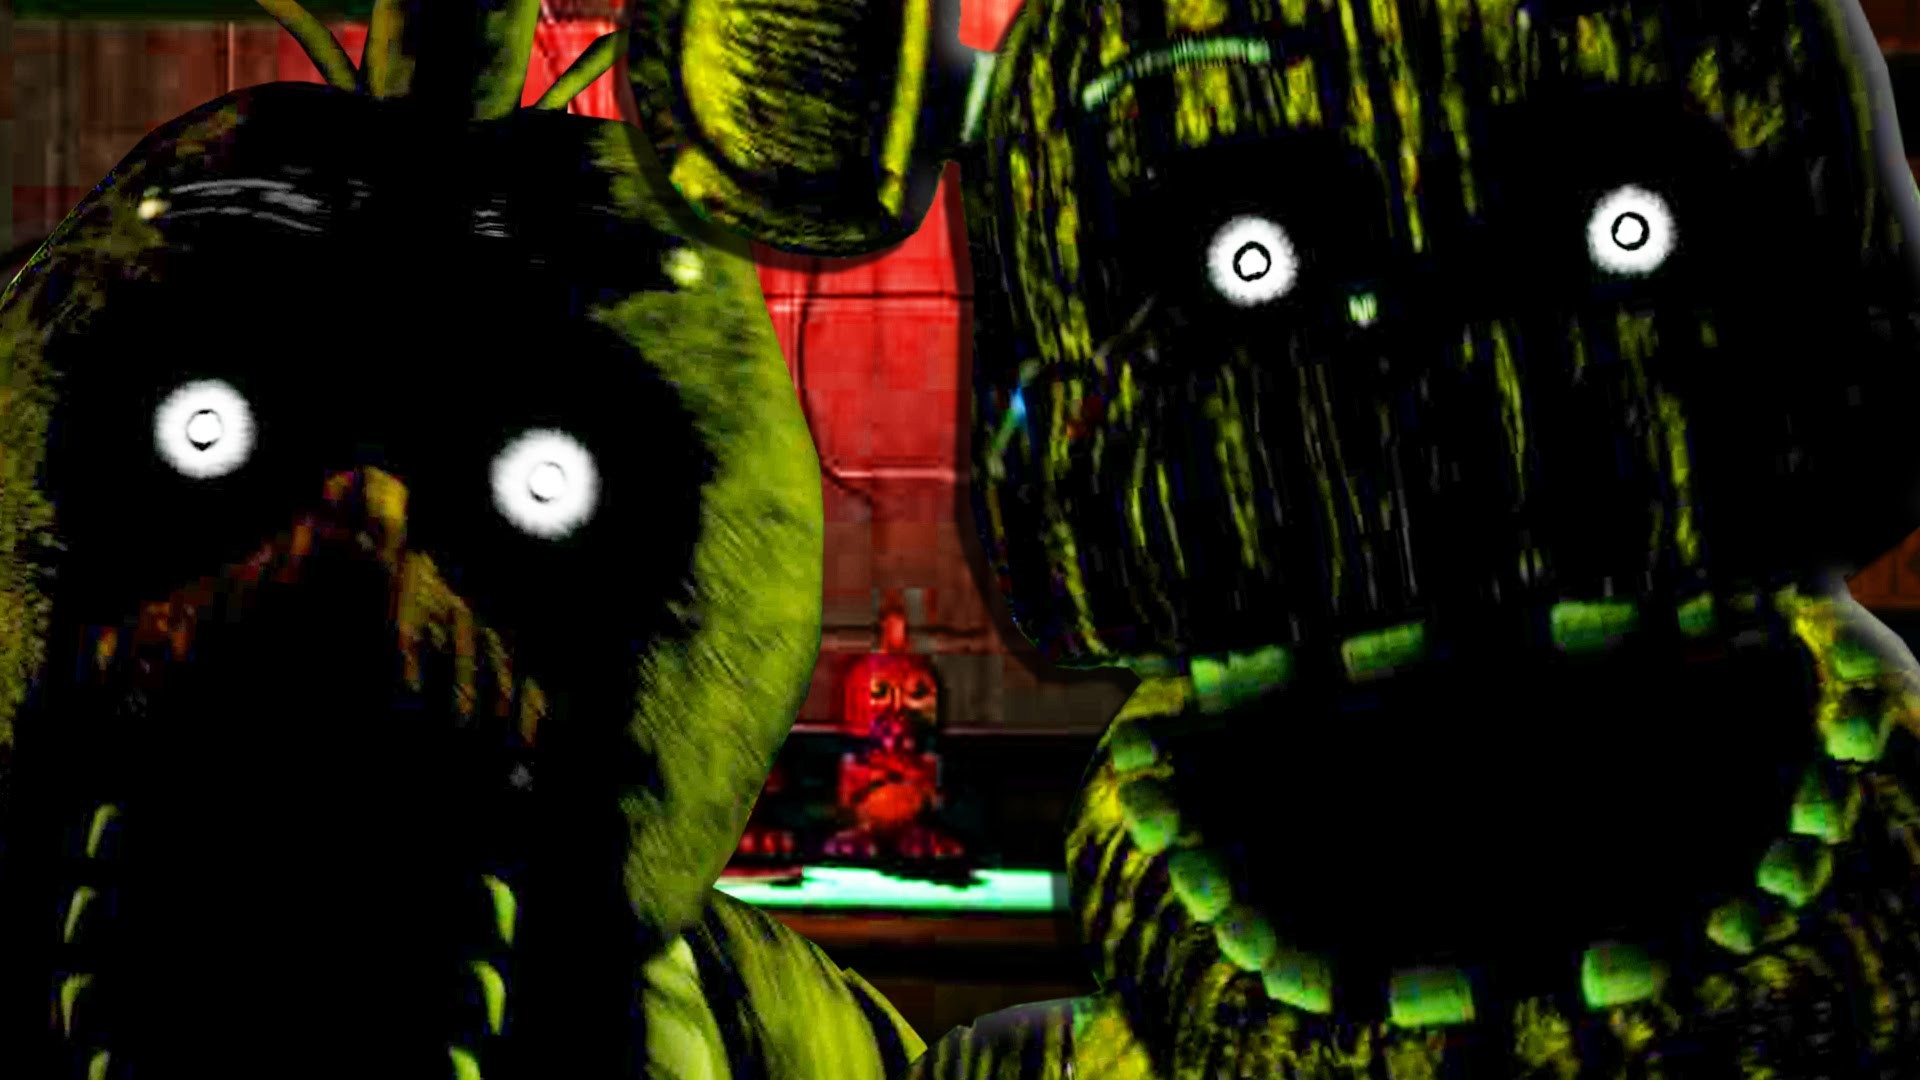 FIVE NIGHTS AT FREDDYS 3 – FREDDY FAZBEAR AND CHICA JUMPSCARE Night 2, 3 Gameplay FNAF 3 – YouTube